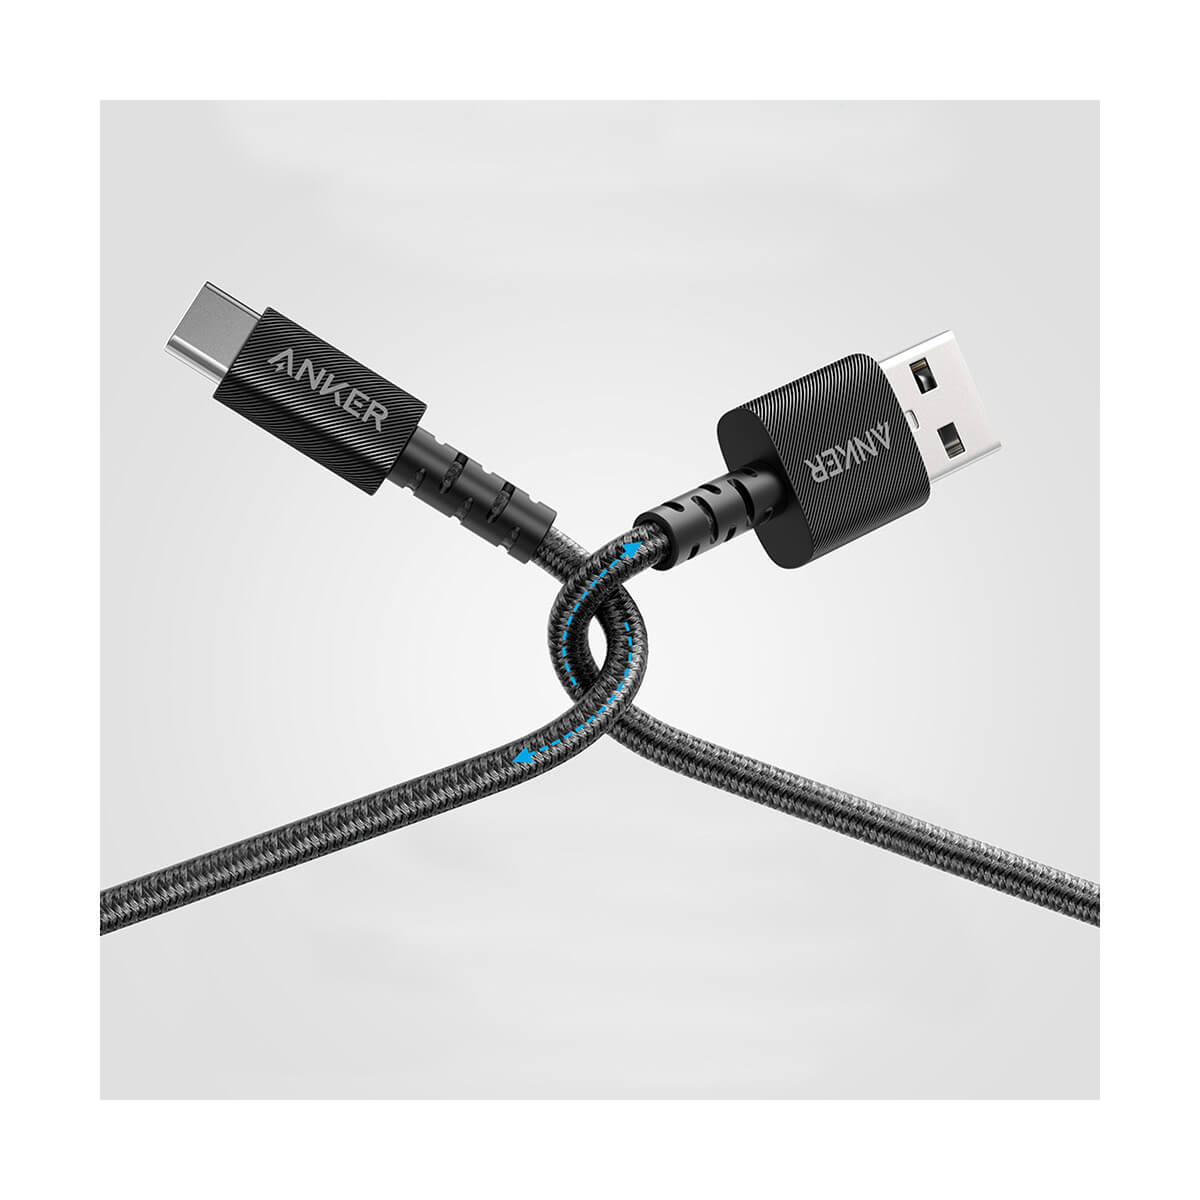 Anker PowerLine Select+ USB-C to USB 2.0 Cable 3ft / 0.9m